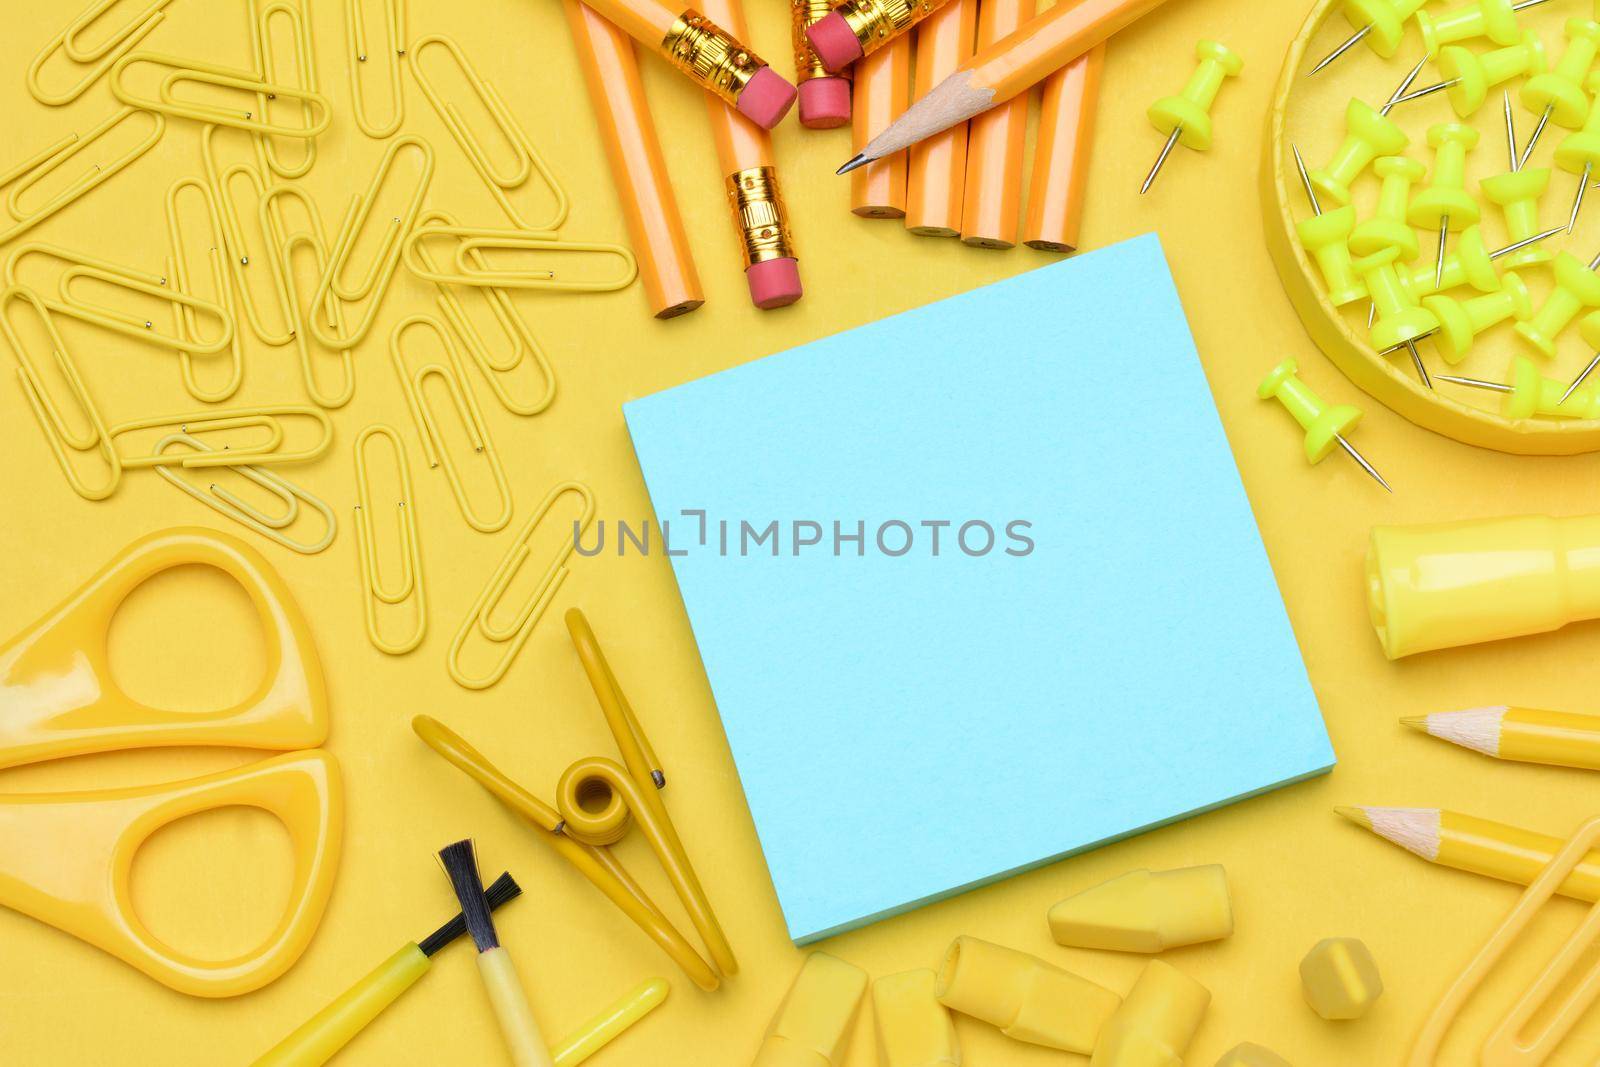 School supplies. Pencils, erasers, paper clips, brushes, pins, scissors, paper laying in a random pattern on a yellow background. Everything in a shade of yellow except for the blue note pad.